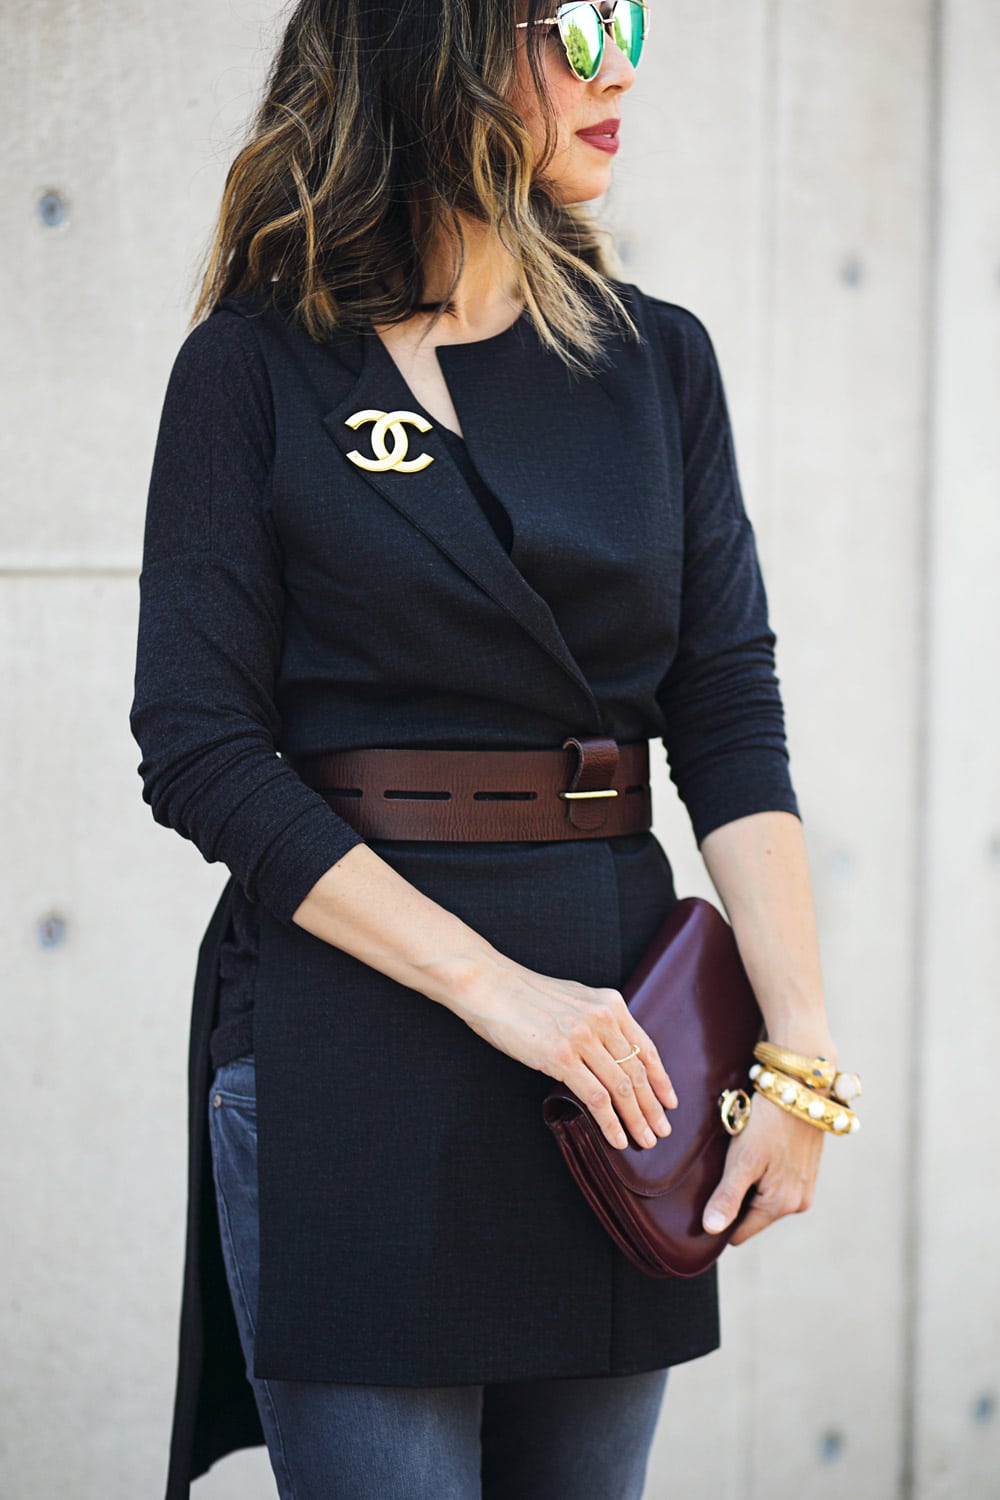 chanel brooch outfit